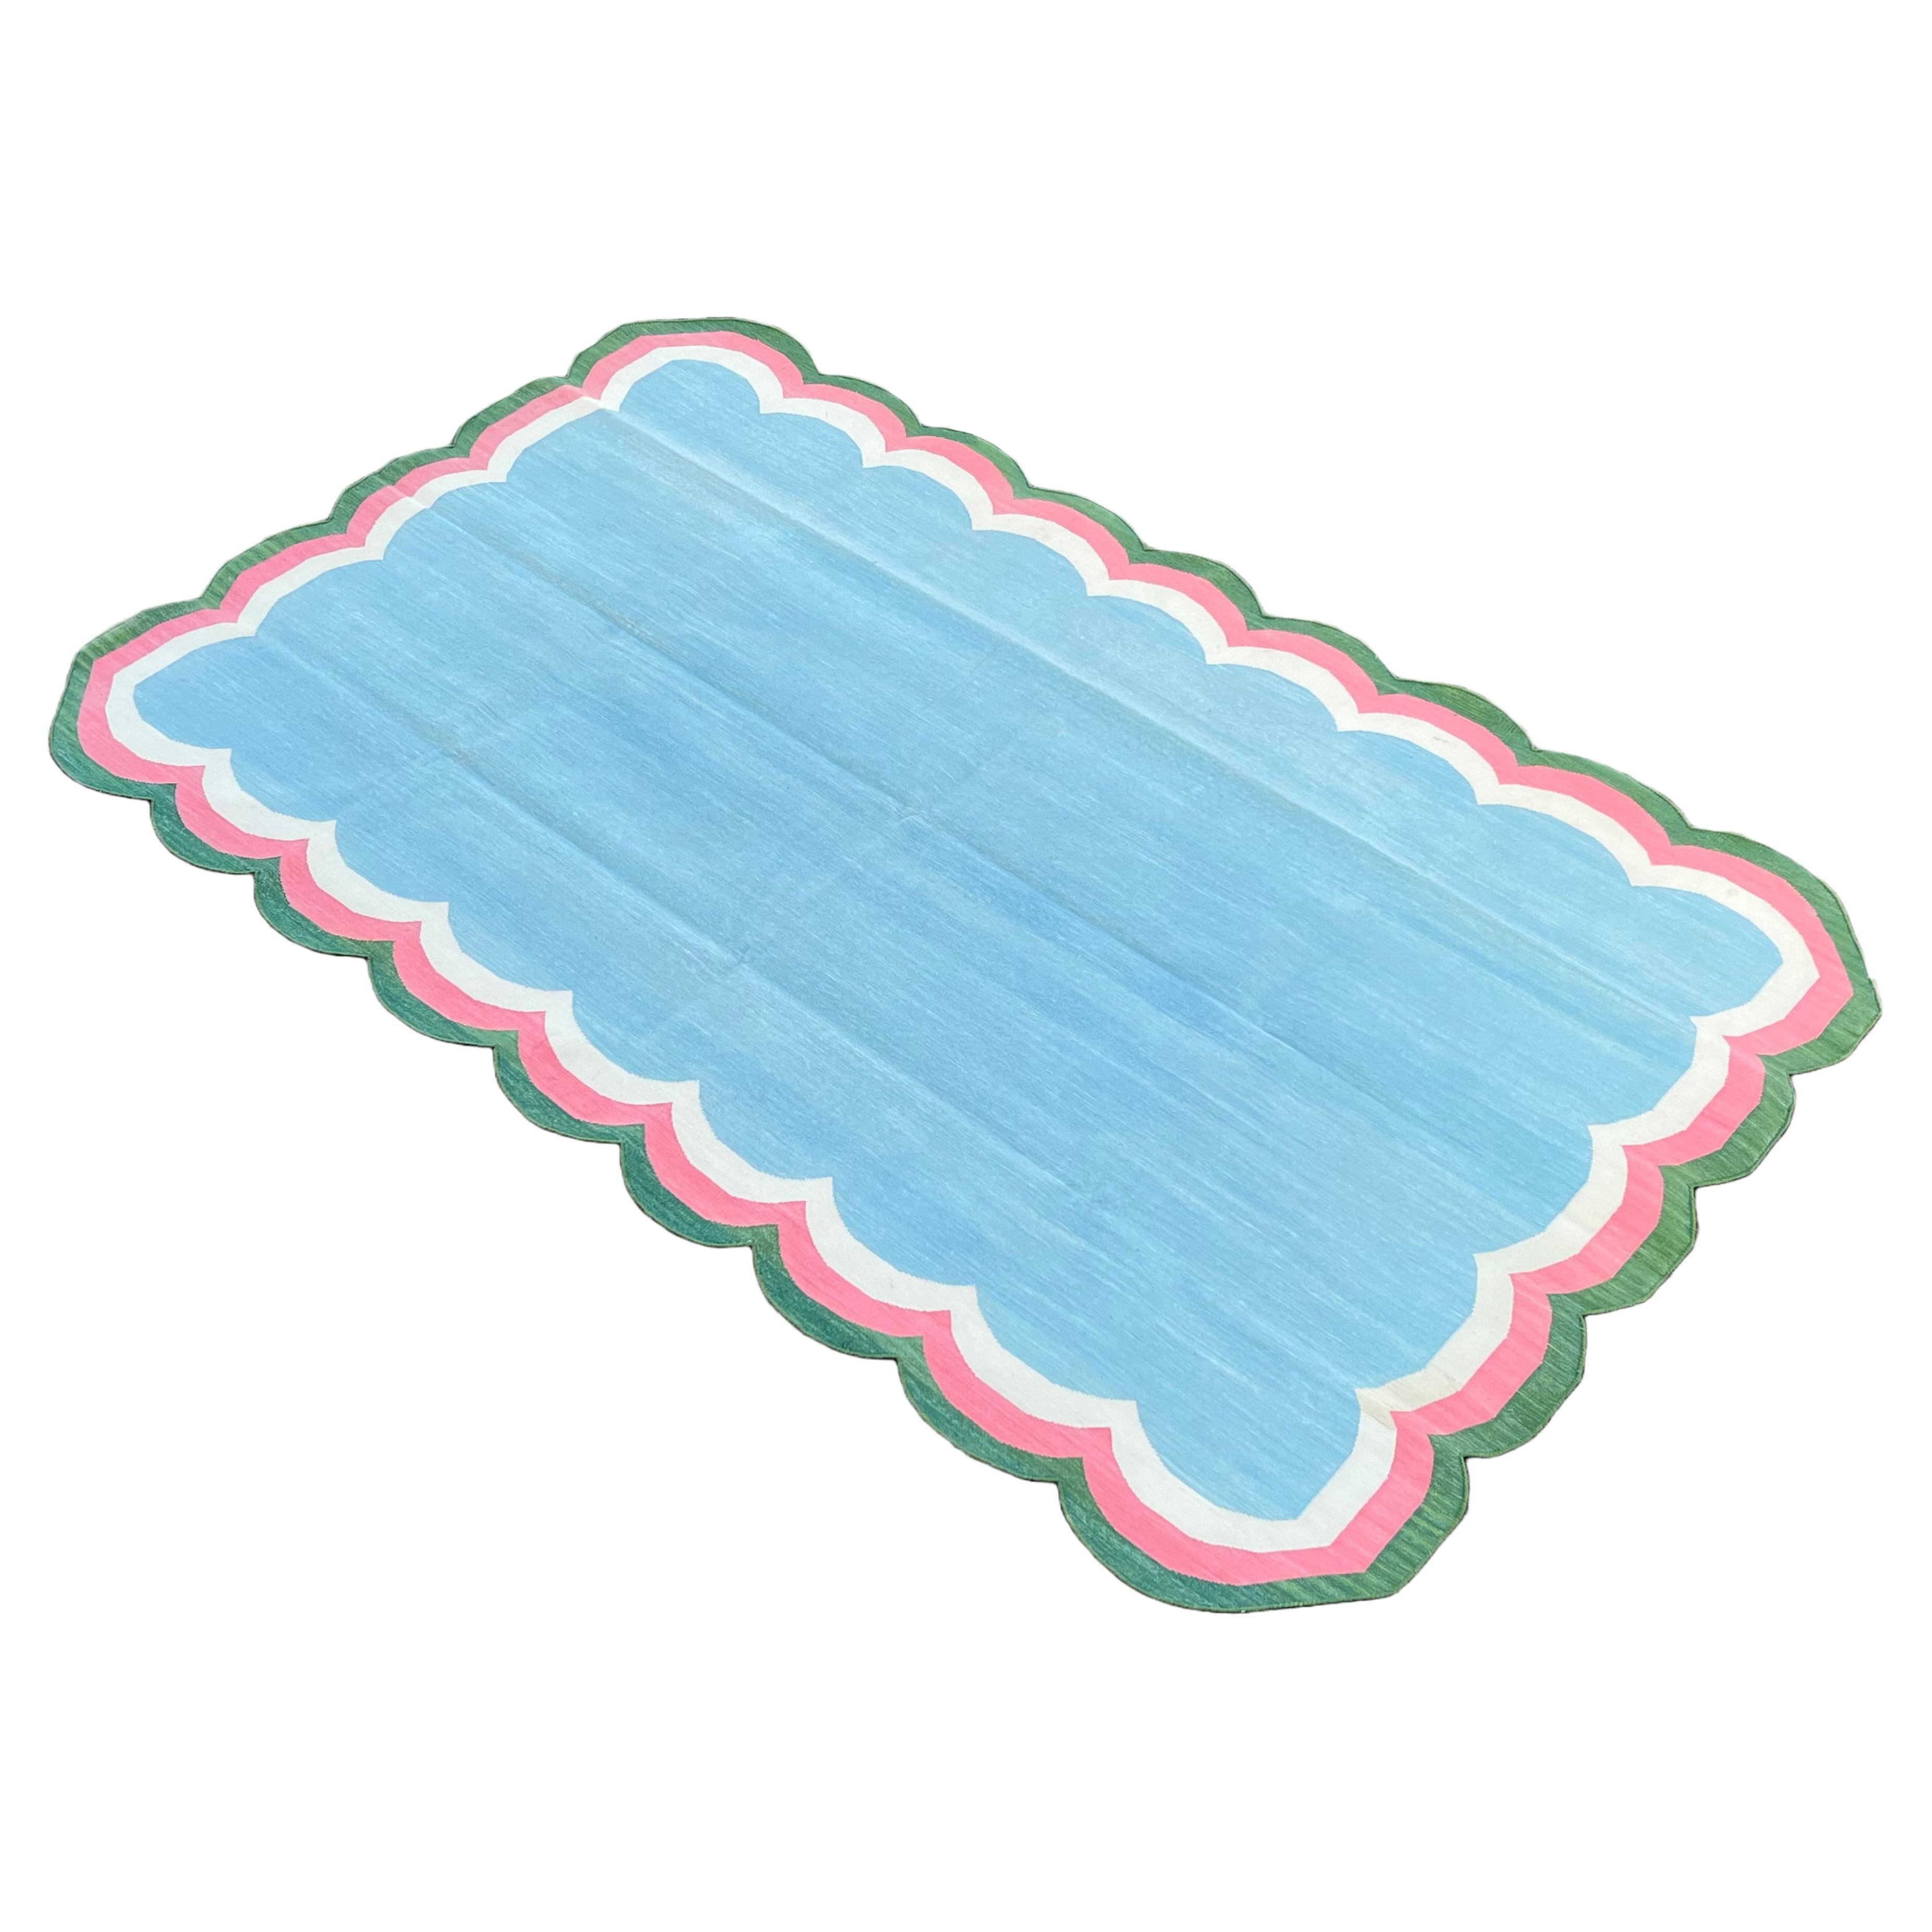 Handmade Cotton Area Flat Weave Rug, Blue, Pink, Green Scalloped Indian Dhurrie For Sale